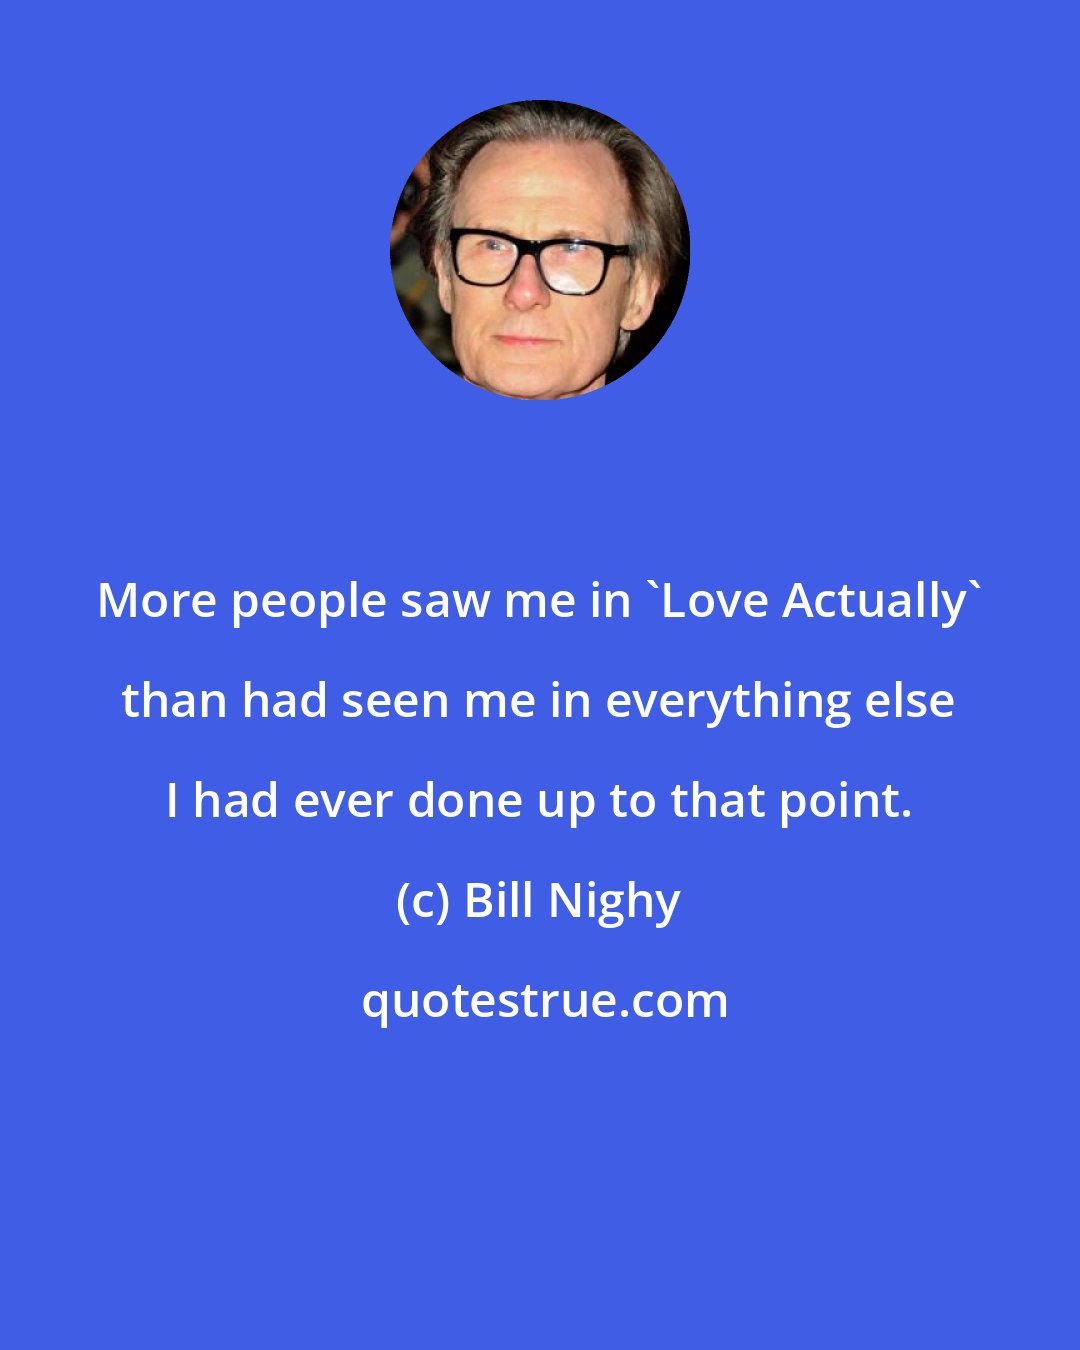 Bill Nighy: More people saw me in 'Love Actually' than had seen me in everything else I had ever done up to that point.